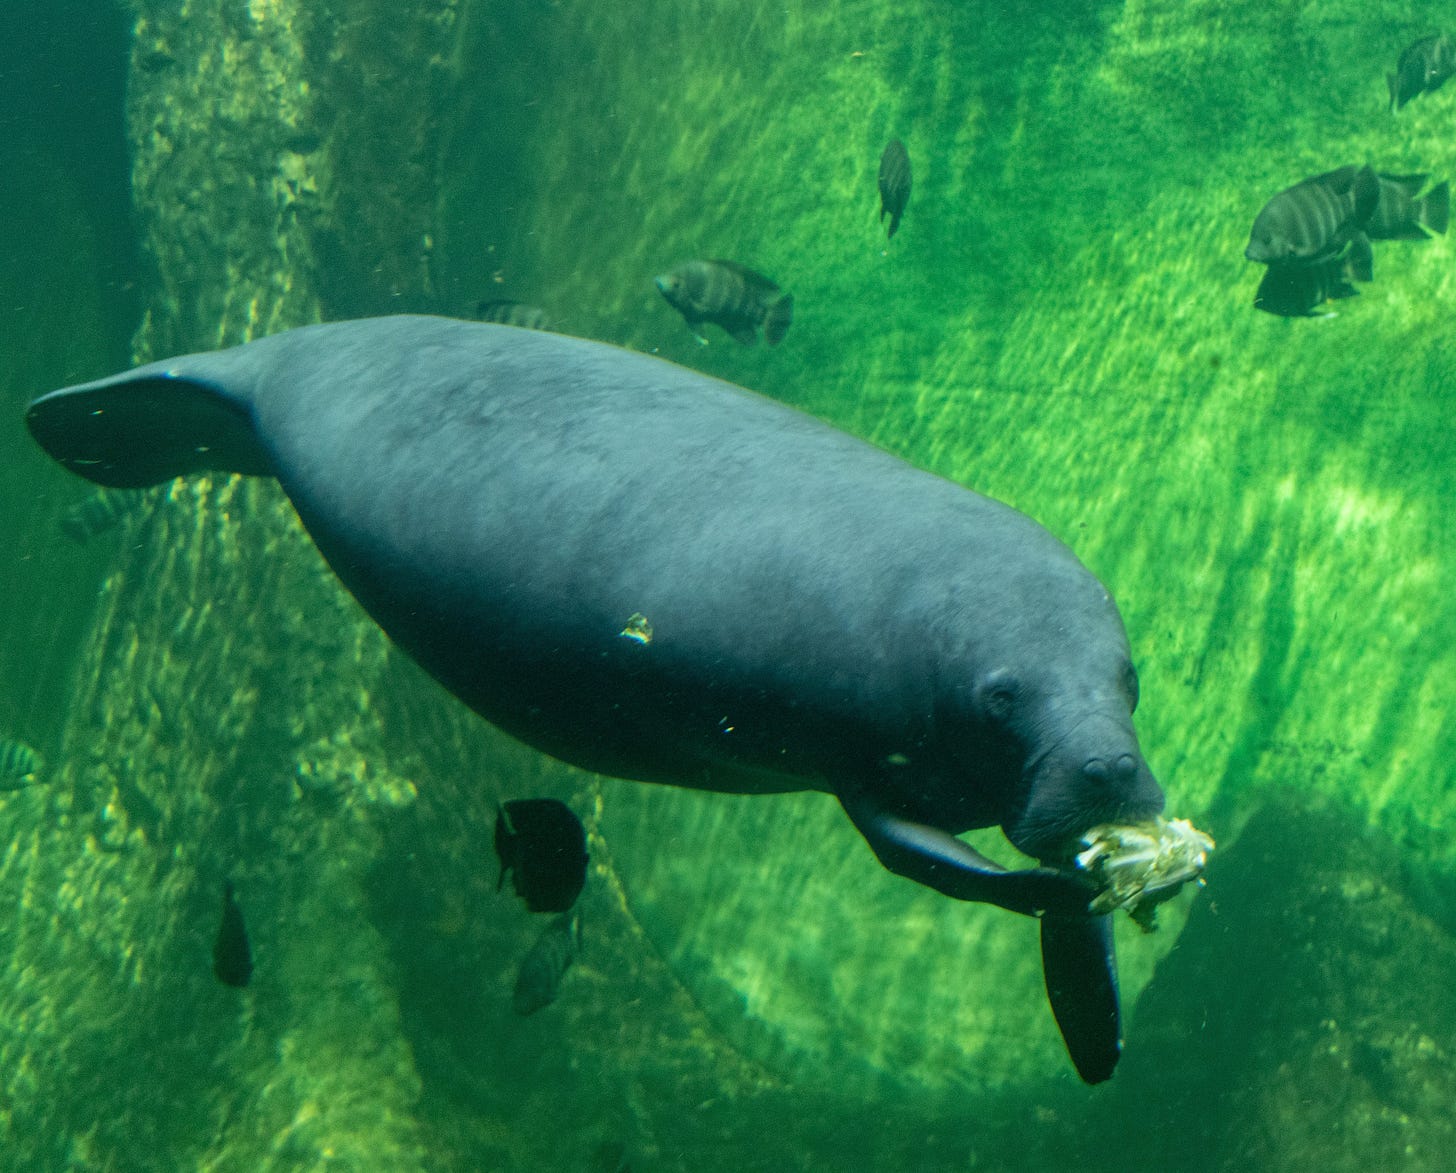 A manatee swimming with fish in green zoo aquarium water while using a front flipper to cram some greens into its mouth